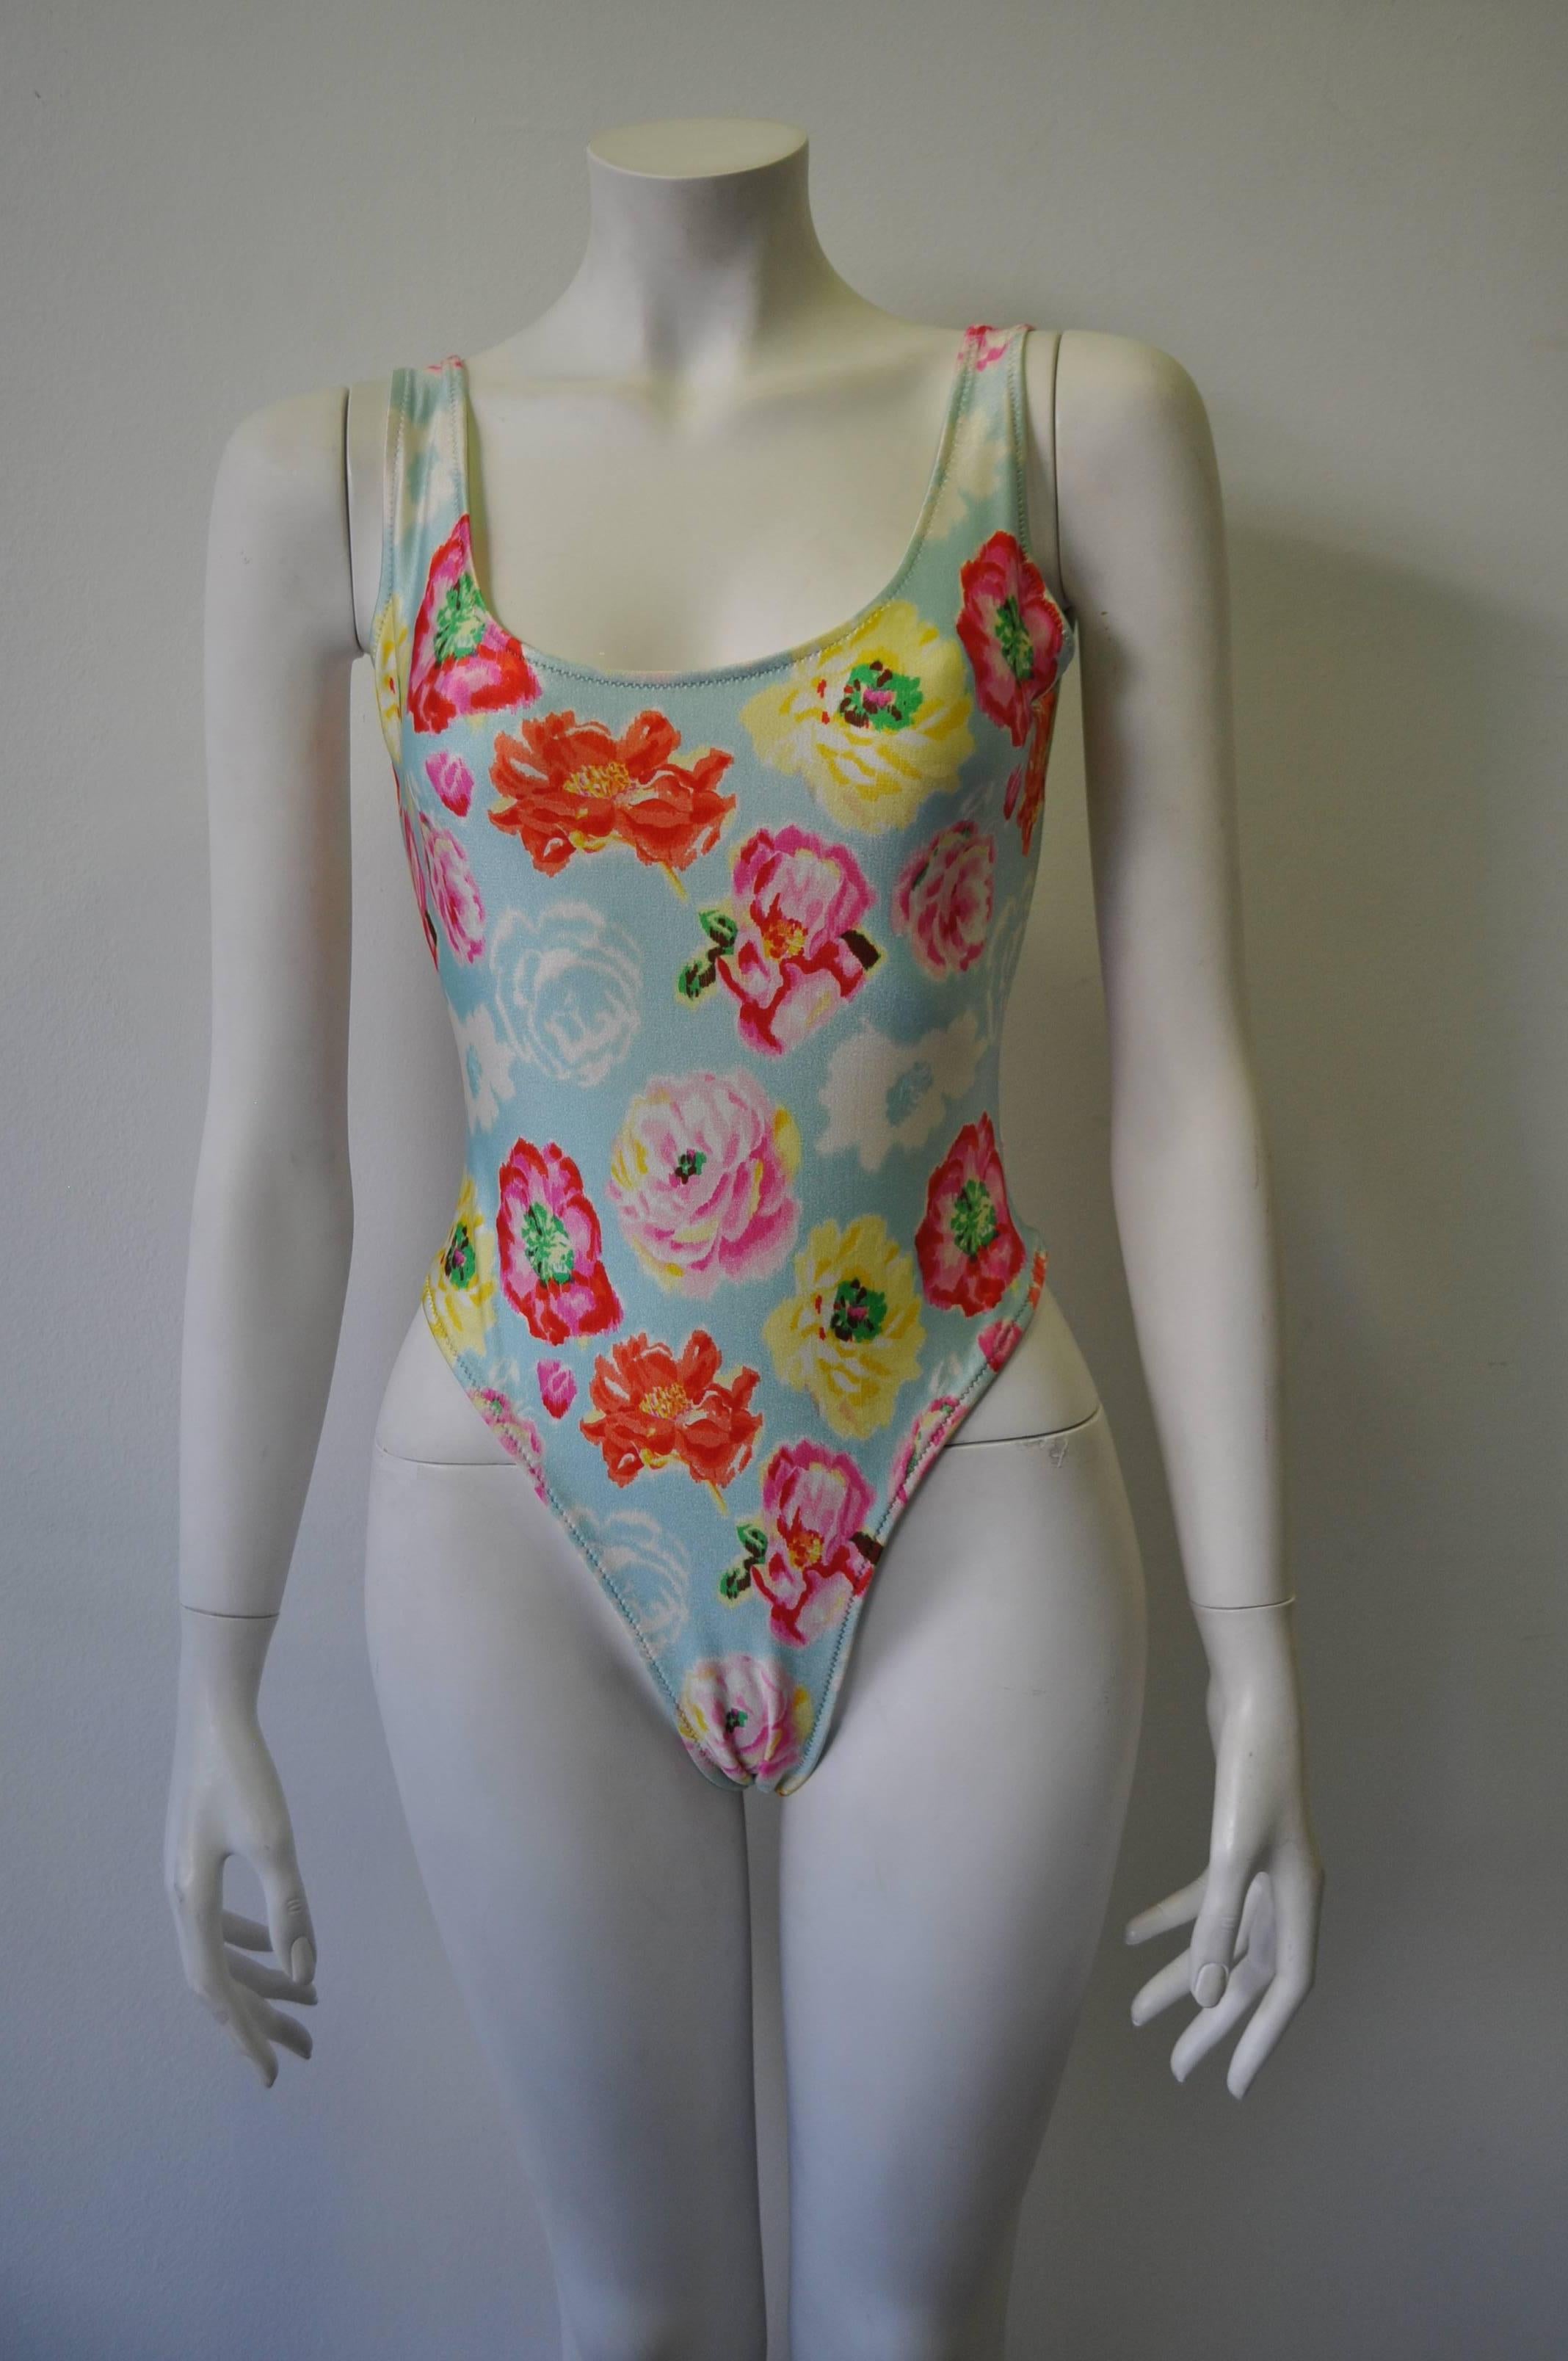 Gianni Versace Istante Mare Spring Floral Bathing Suit, Spring 1995 Collection